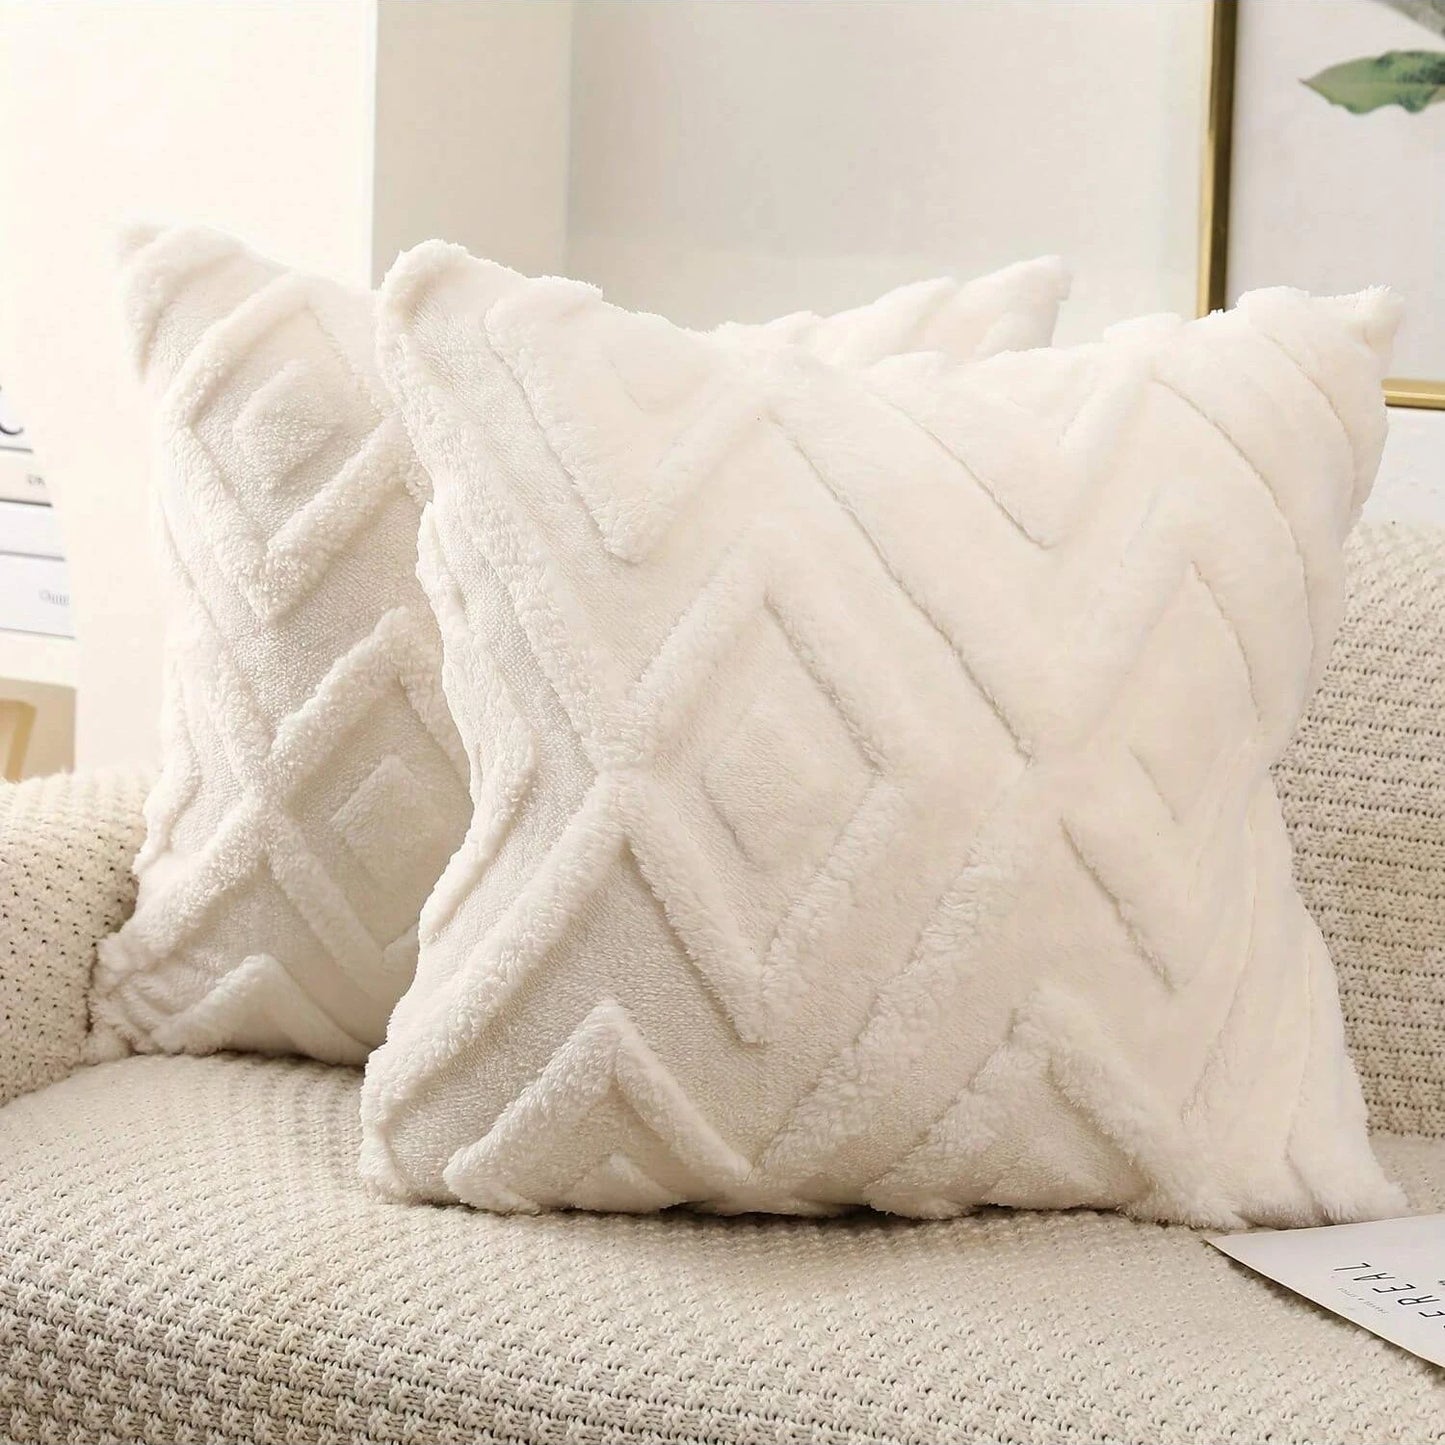 1Pc Decorative Faux Wool Throw Pillow Covers Christmas Soft Plush Fuzzy Short Fleece Square Patterned Cushion Cases Solid Pillow